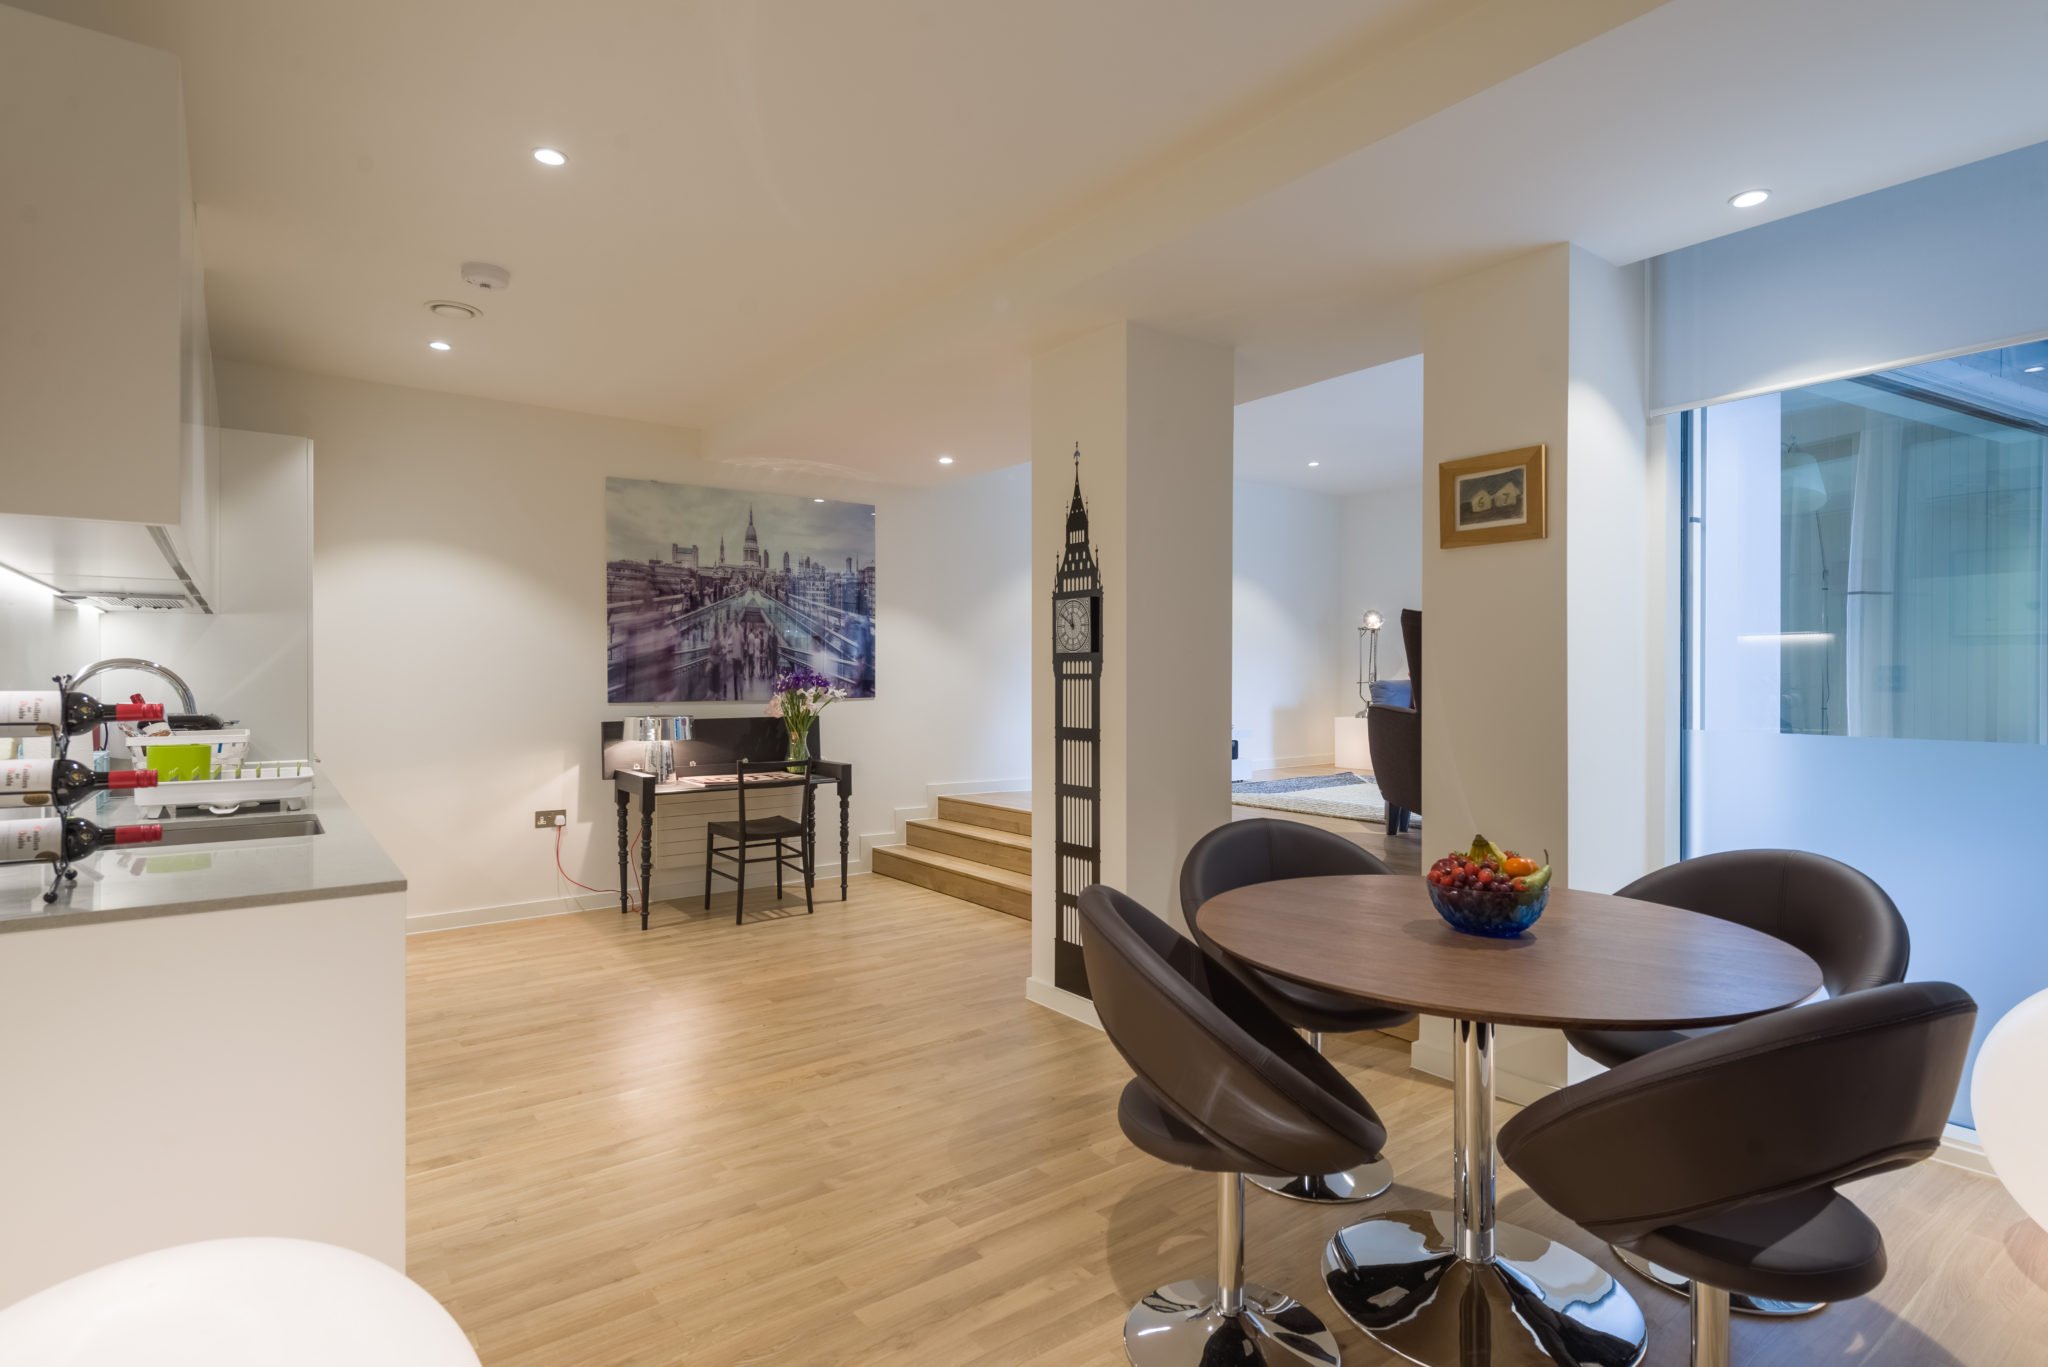 Are-you-looking-for-affordable-accommodation-near-Holborn?-why-not-book-our-Chancery-Lane-Apartments-Star-Yard-London-today-with-Urban-Stay-for-great-rates.